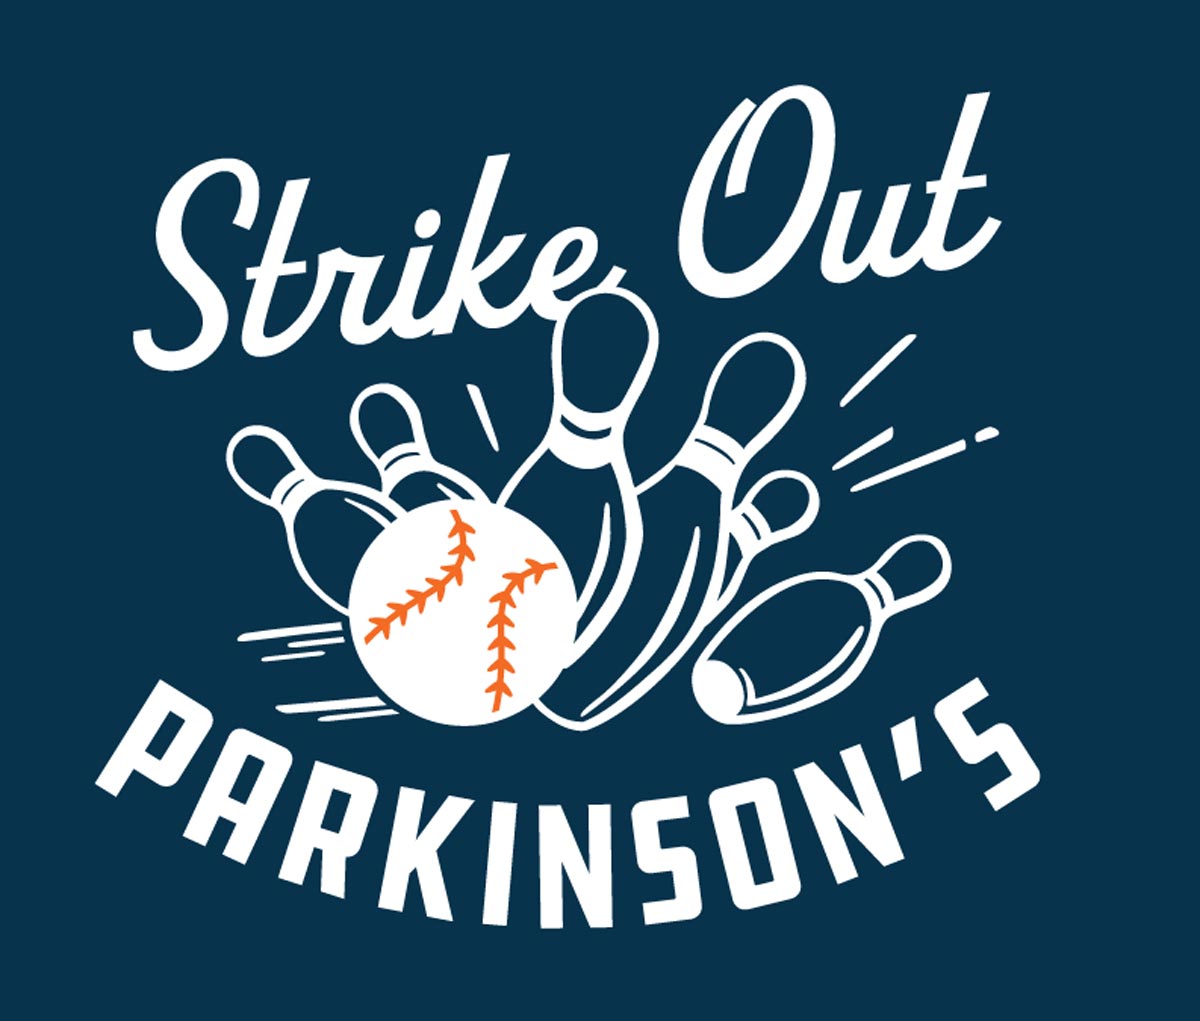 Kirk Gibson building a new legacy in fight against Parkinson's